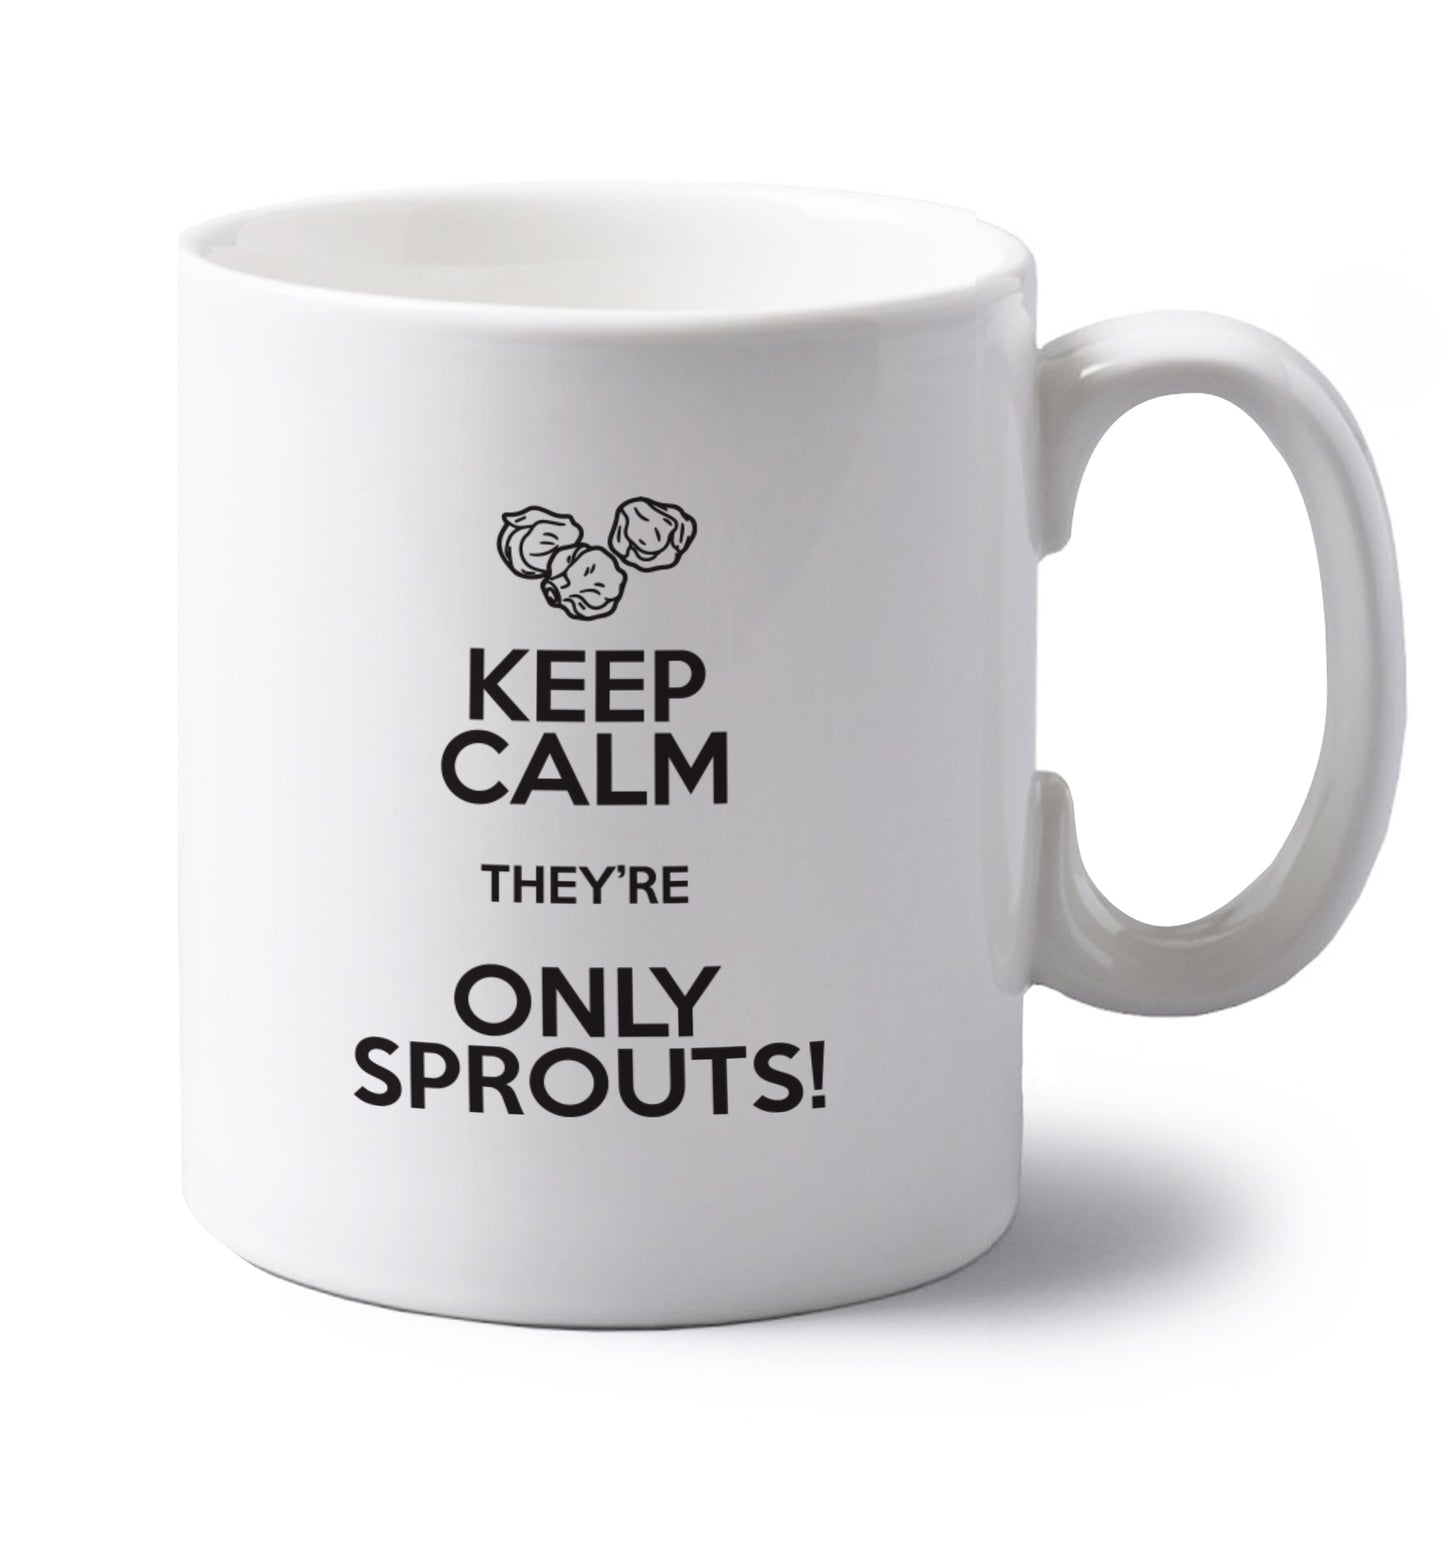 Keep calm they're only sprouts left handed white ceramic mug 